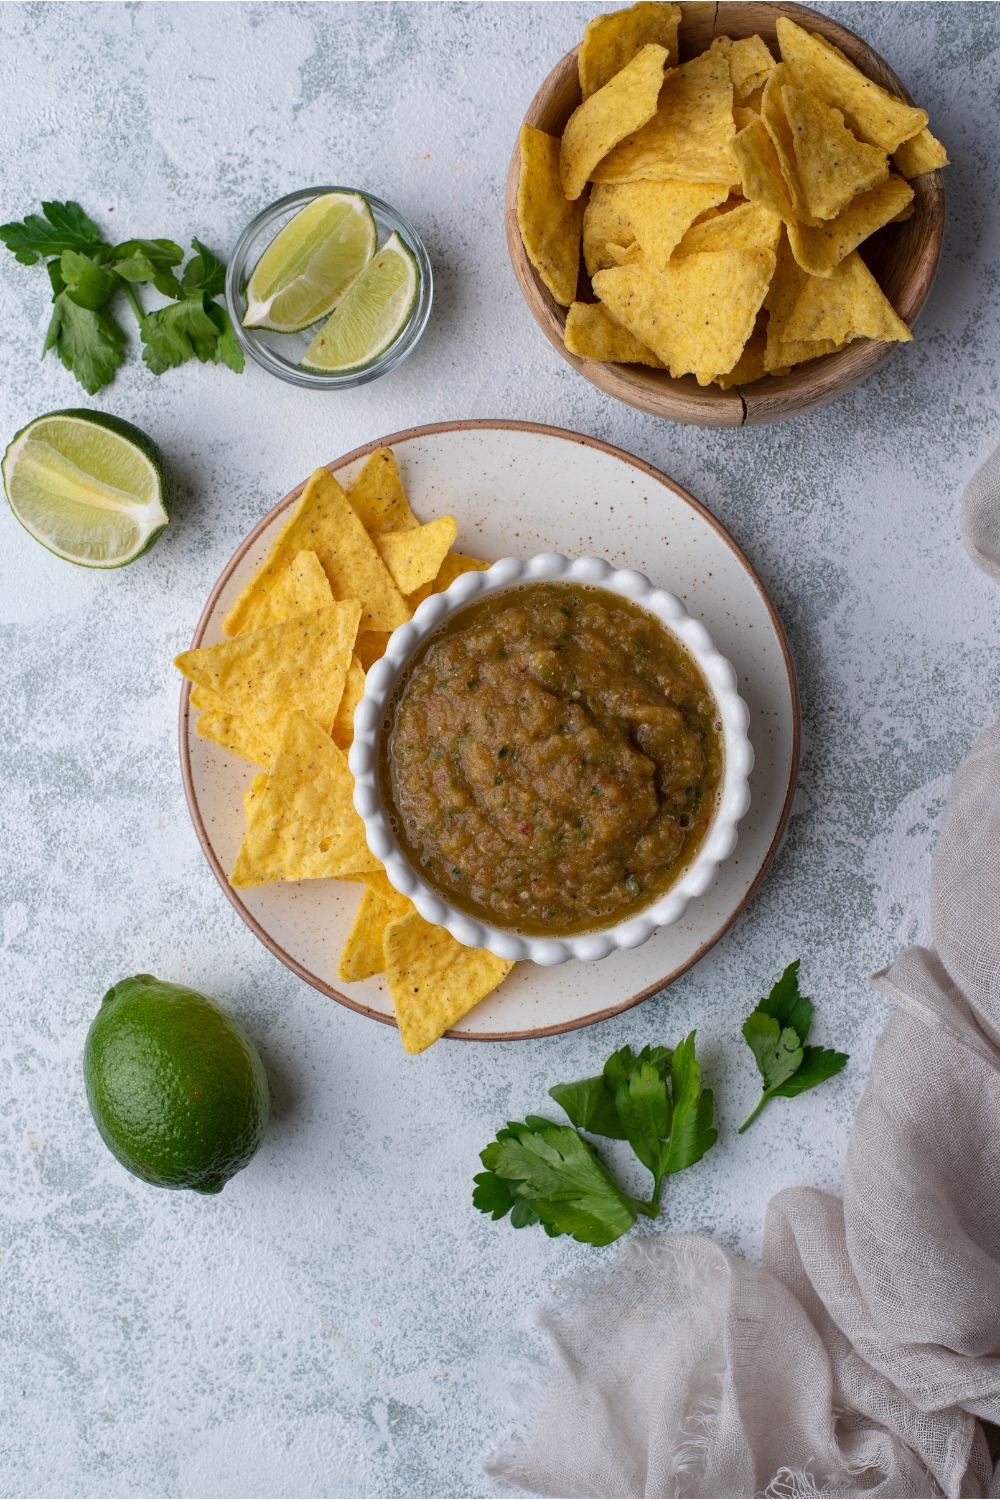 Tomatillo salsa in a small decorative bowl atop a plate filled with tortilla chips. Surrounding the plate of chips and salsa is a bowl of tortilla chips, a bowl of lime wedges, two limes, and fresh cilantro.